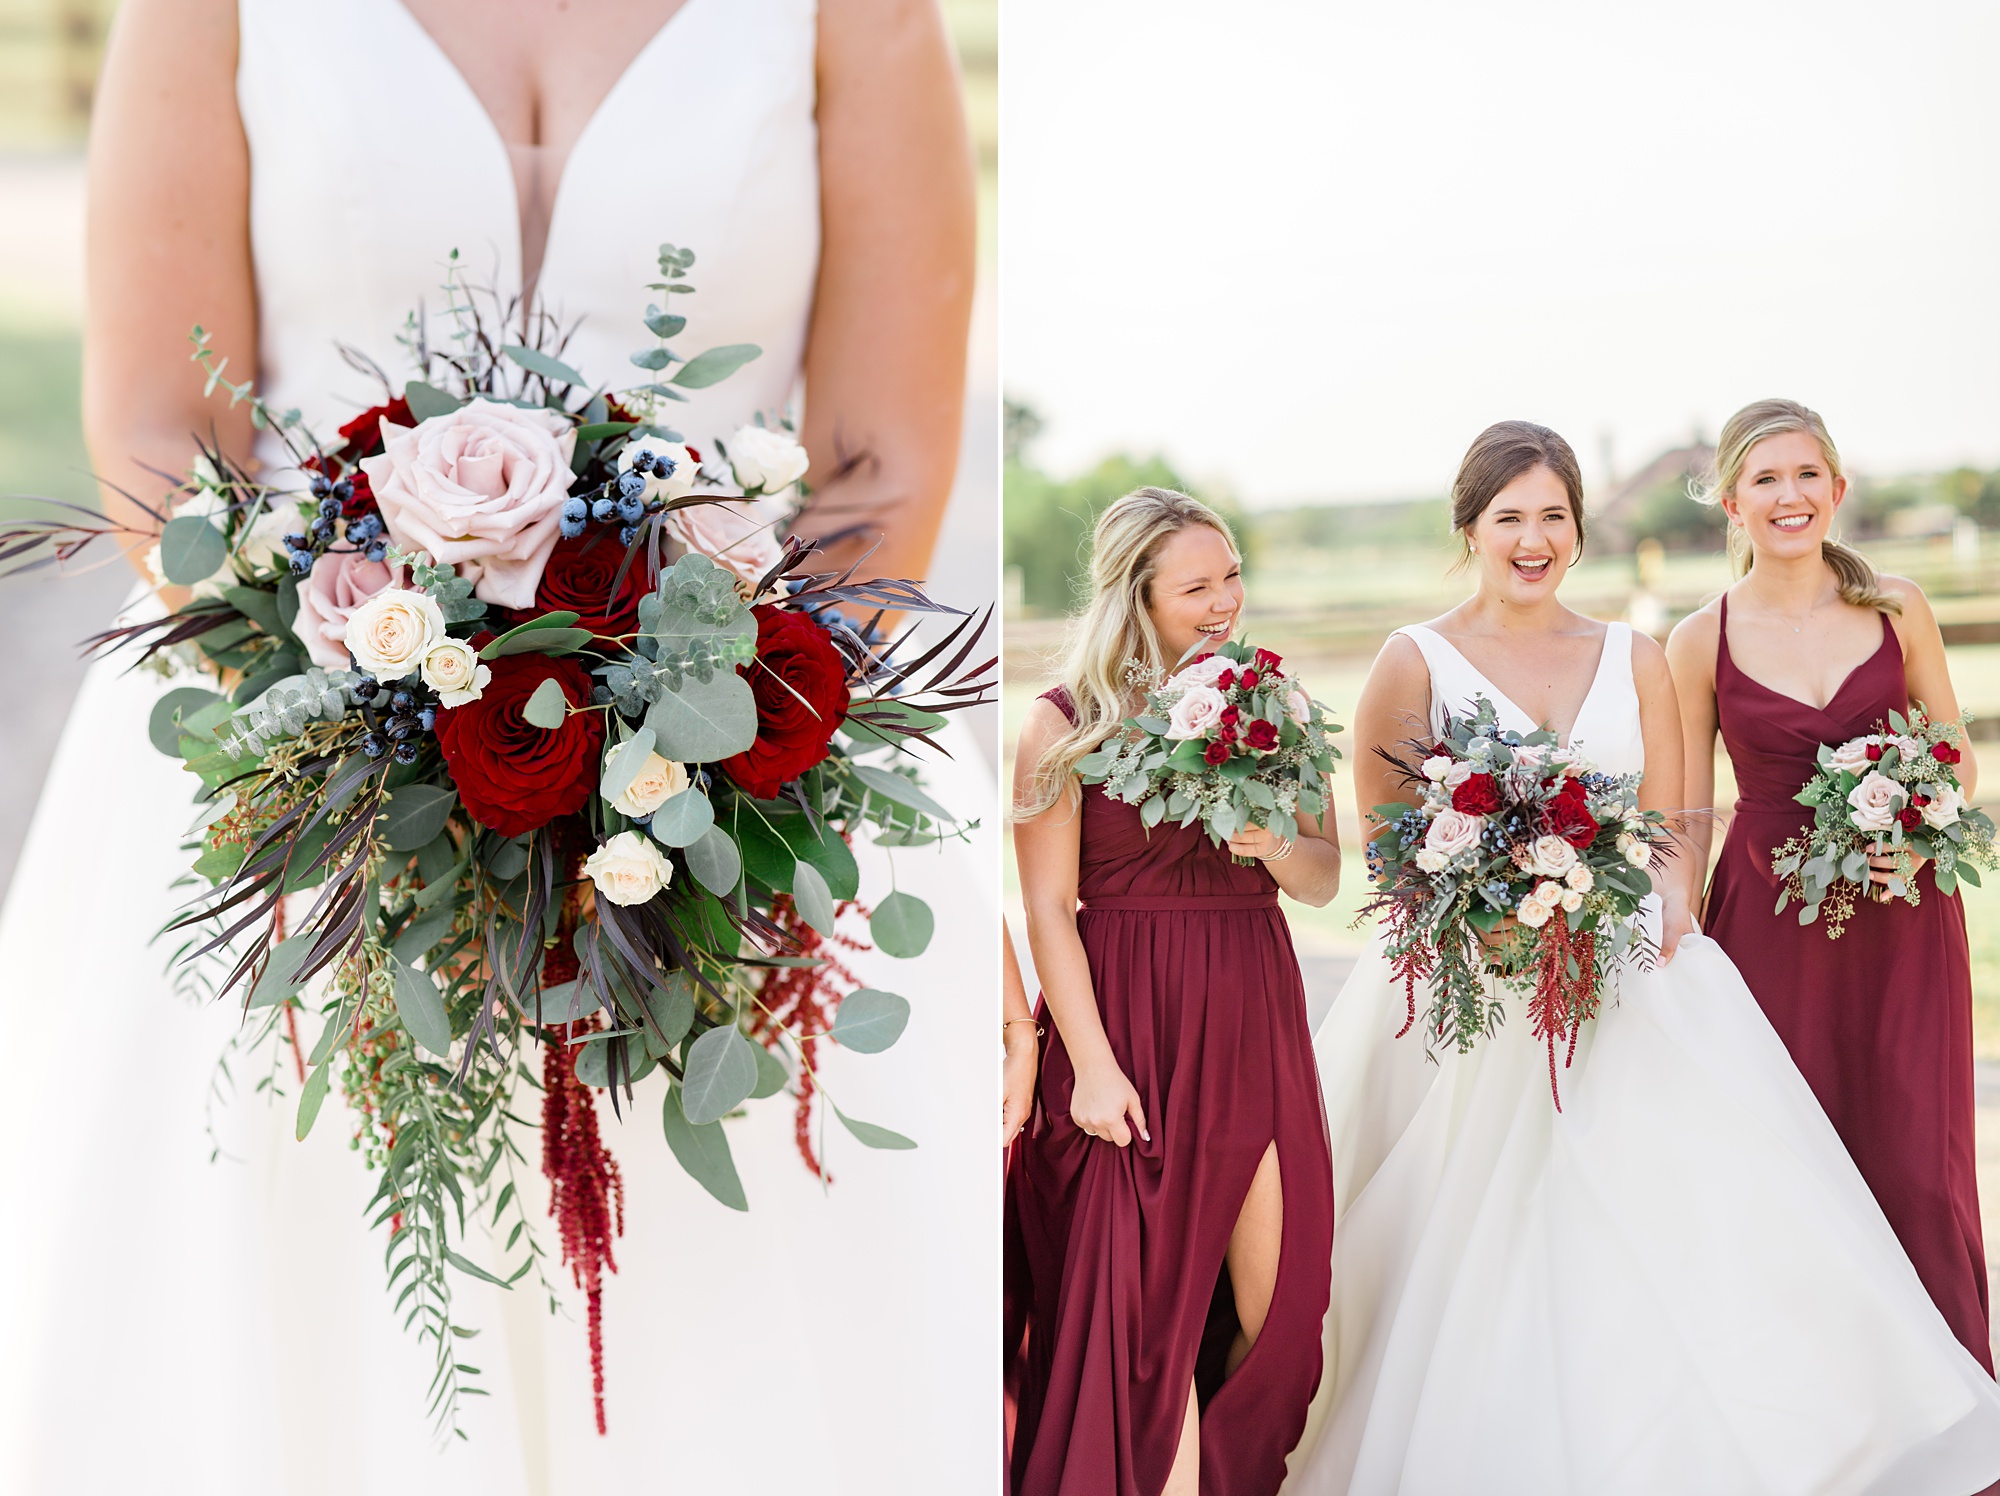 bride poses with bridesmaids in cranberry gowns